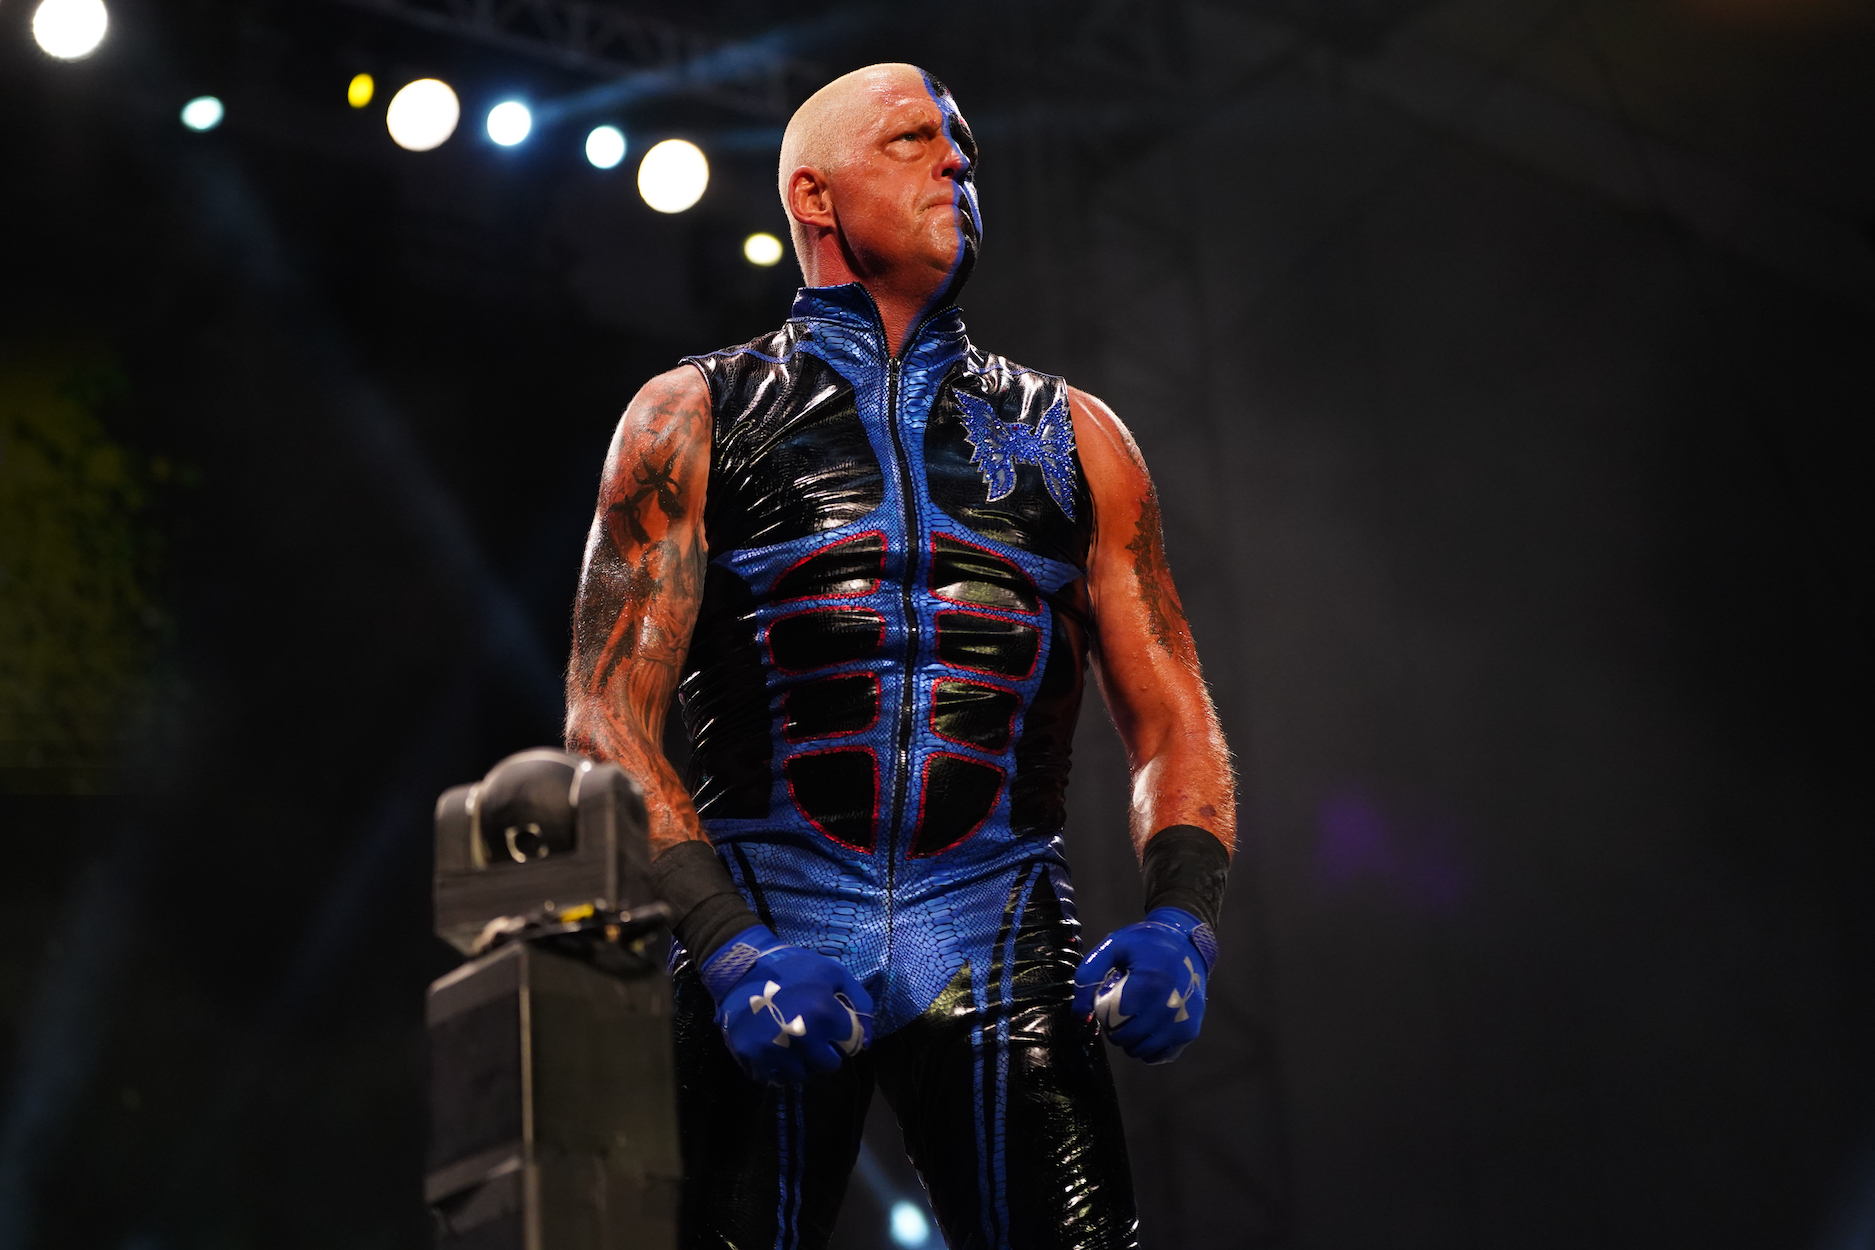 Dustin Rhodes To Appear In Dusty Rhodes A&E Biography